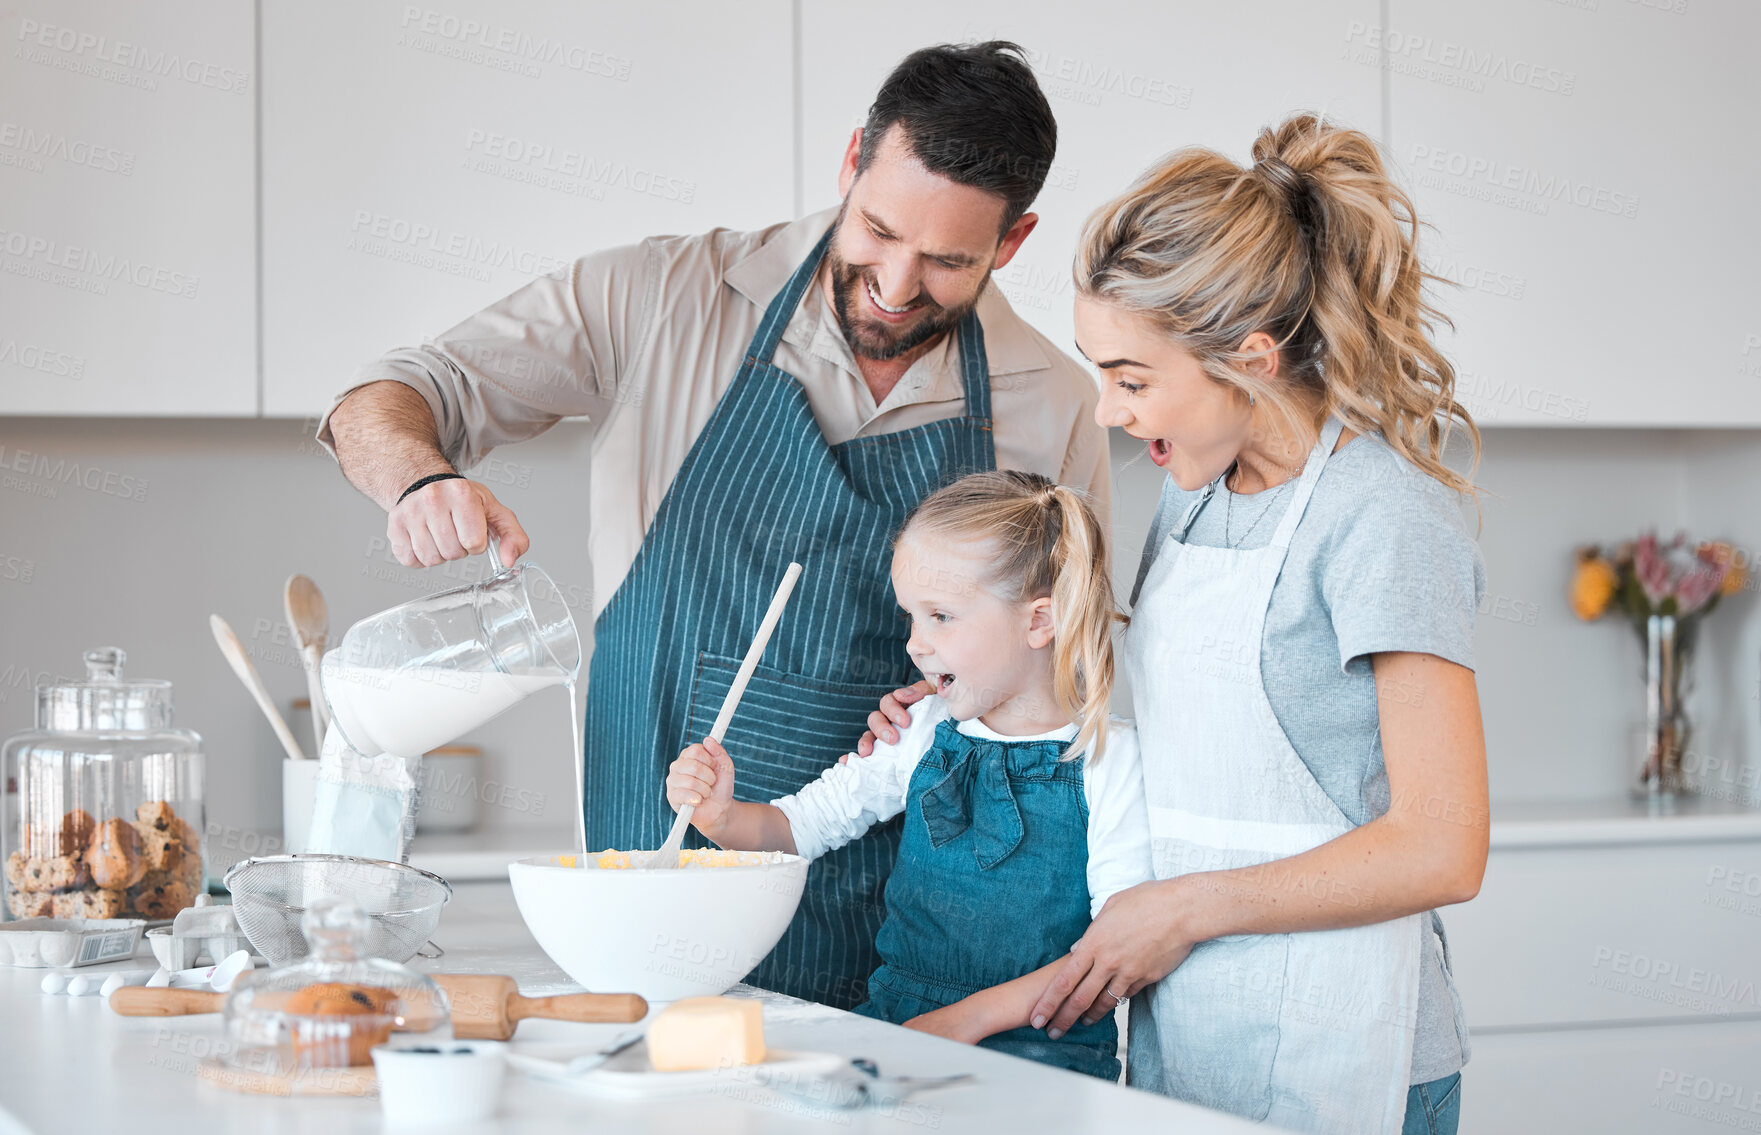 Buy stock photo Father pouring a jug of milk into batter. Happy father baking with his daughter. Caucasian family baking together.Smiling parents helping their child bake. Little girl mixing a bowl of batter.